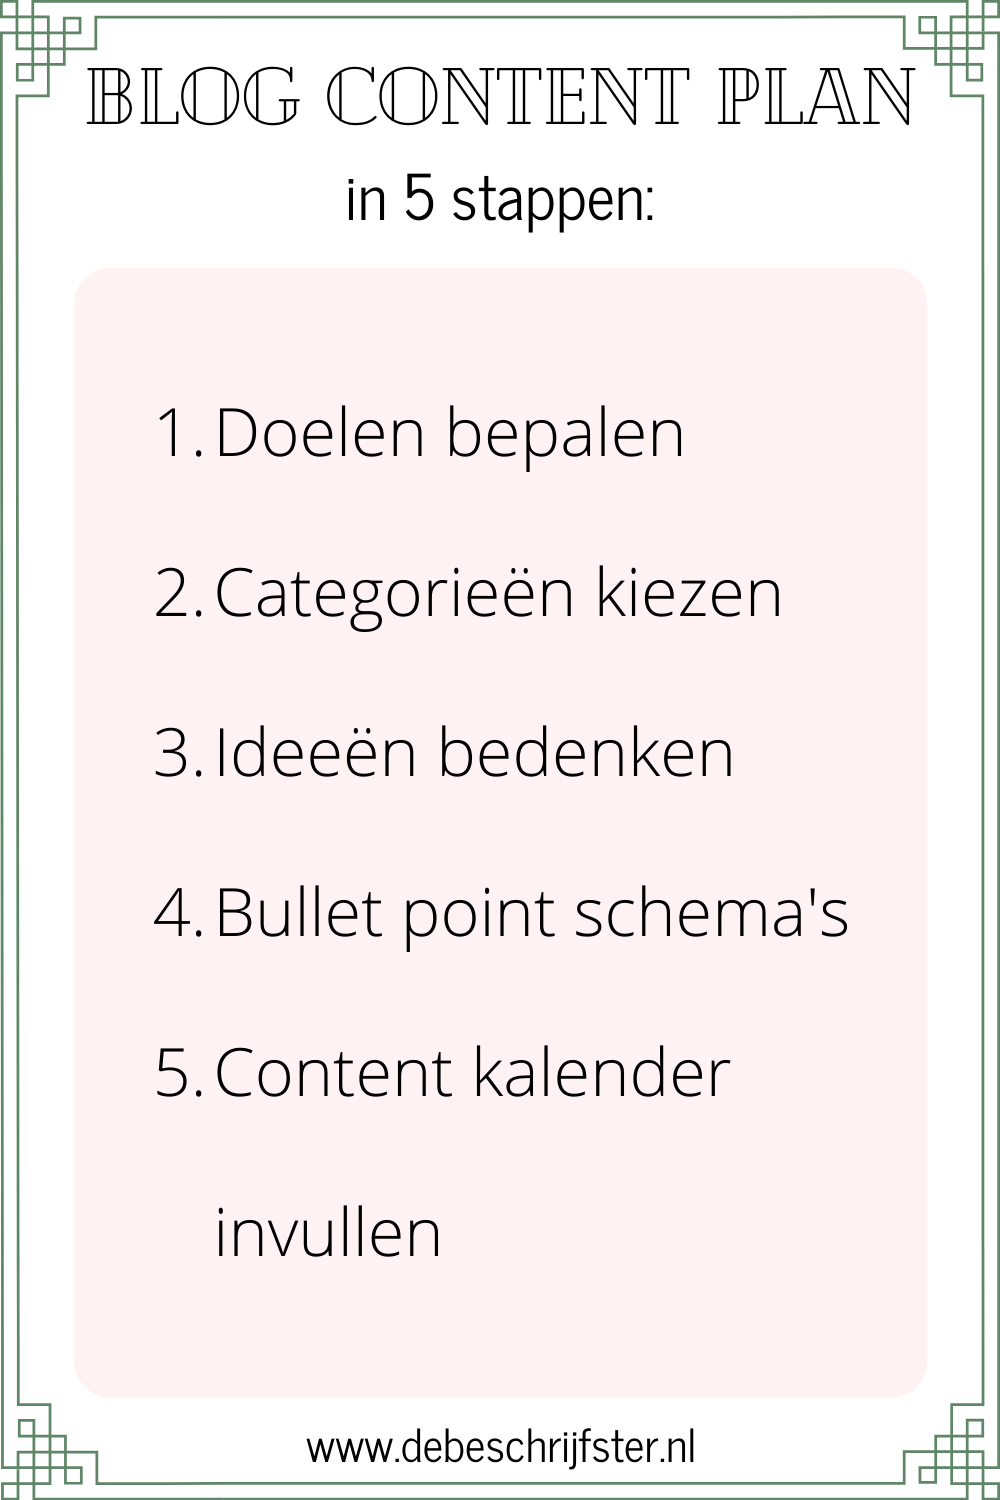 Pin blog content plan in 5 stappen